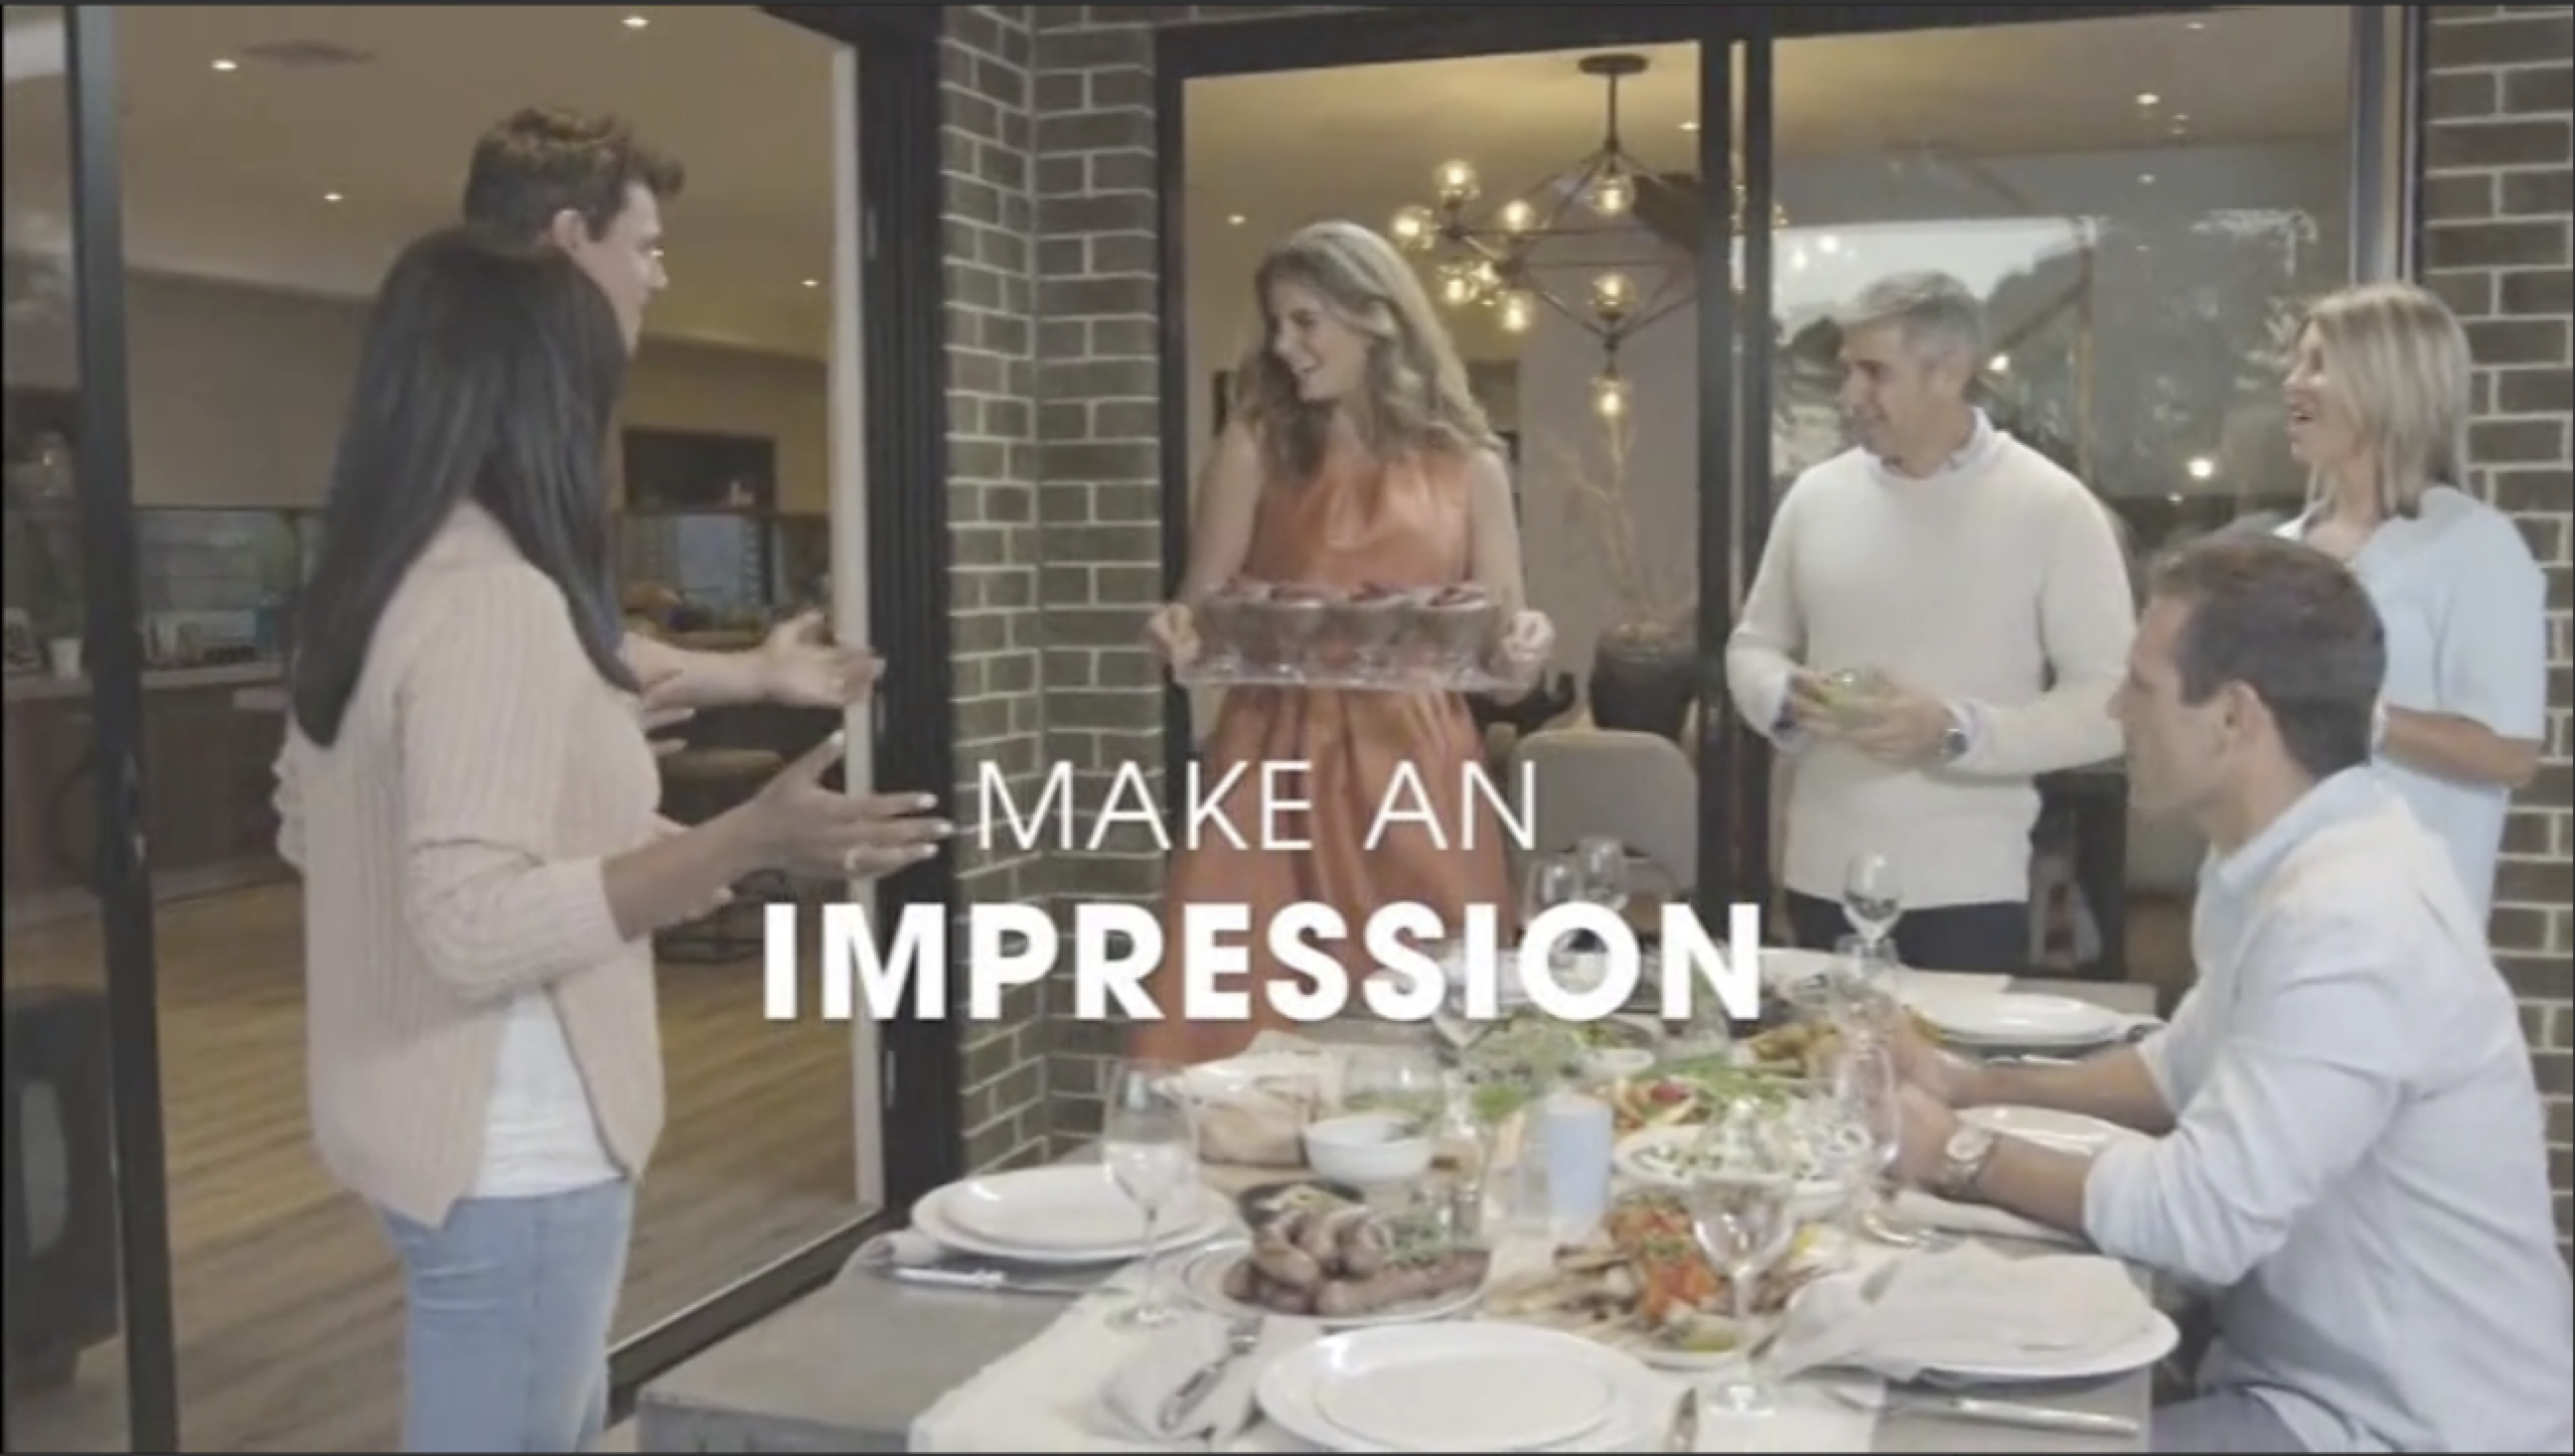 Boutique Homes “Make an impression, build your new home” campaign focused on a price point starting from $187,000.